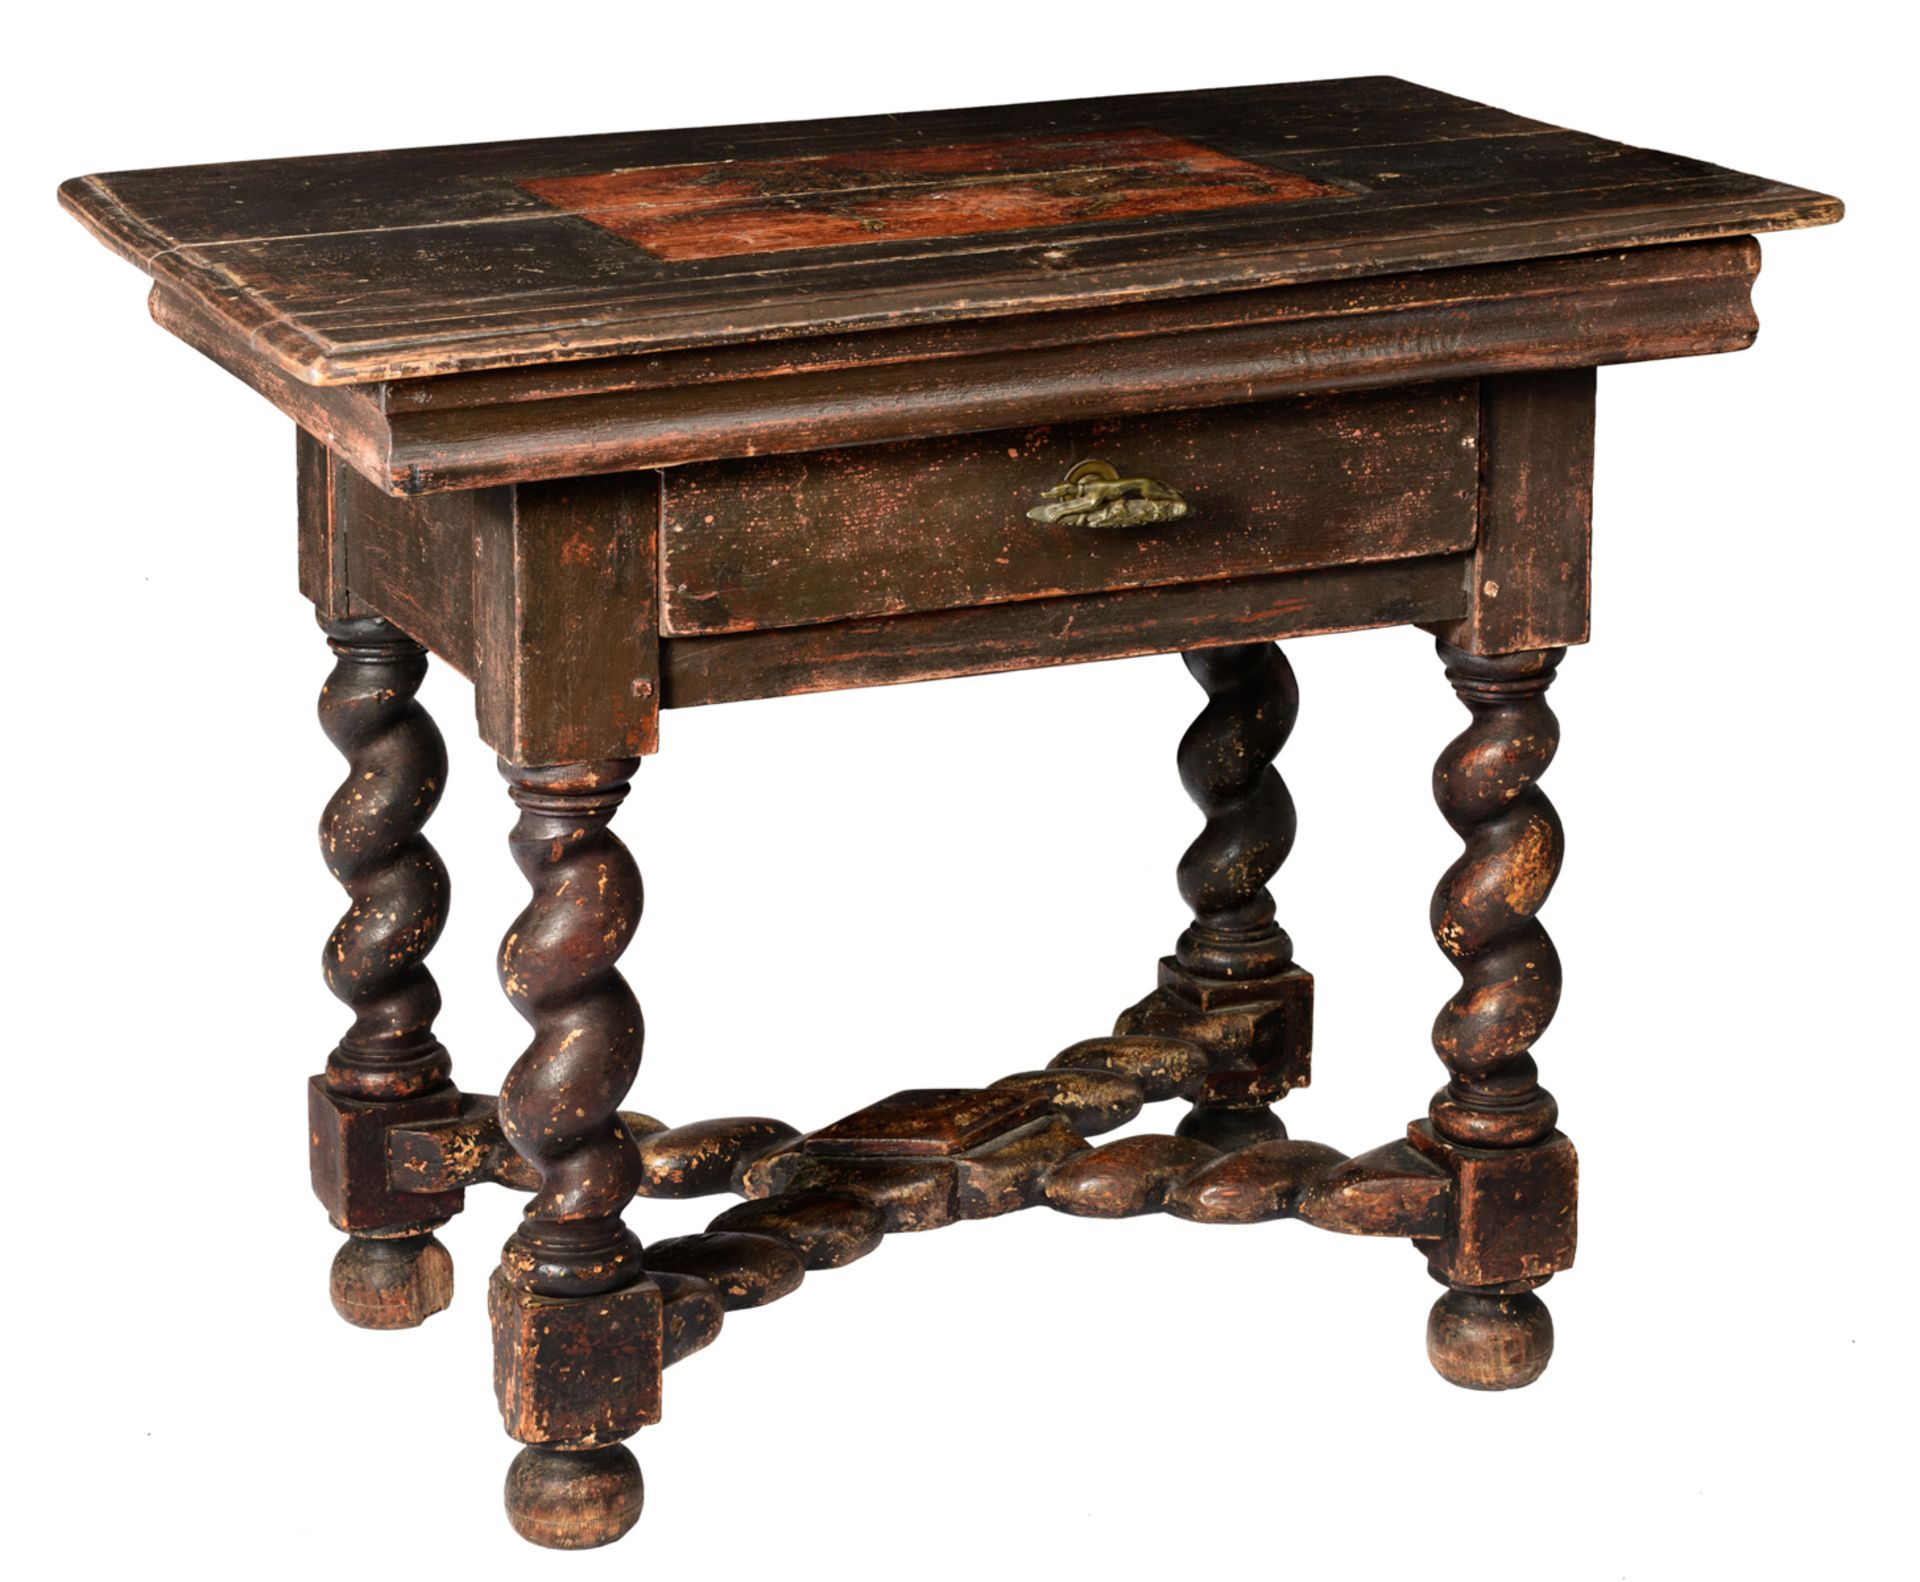 A Southern Europe Baroque style polychrome decorated pine table, with spiral, turned legs, the reser